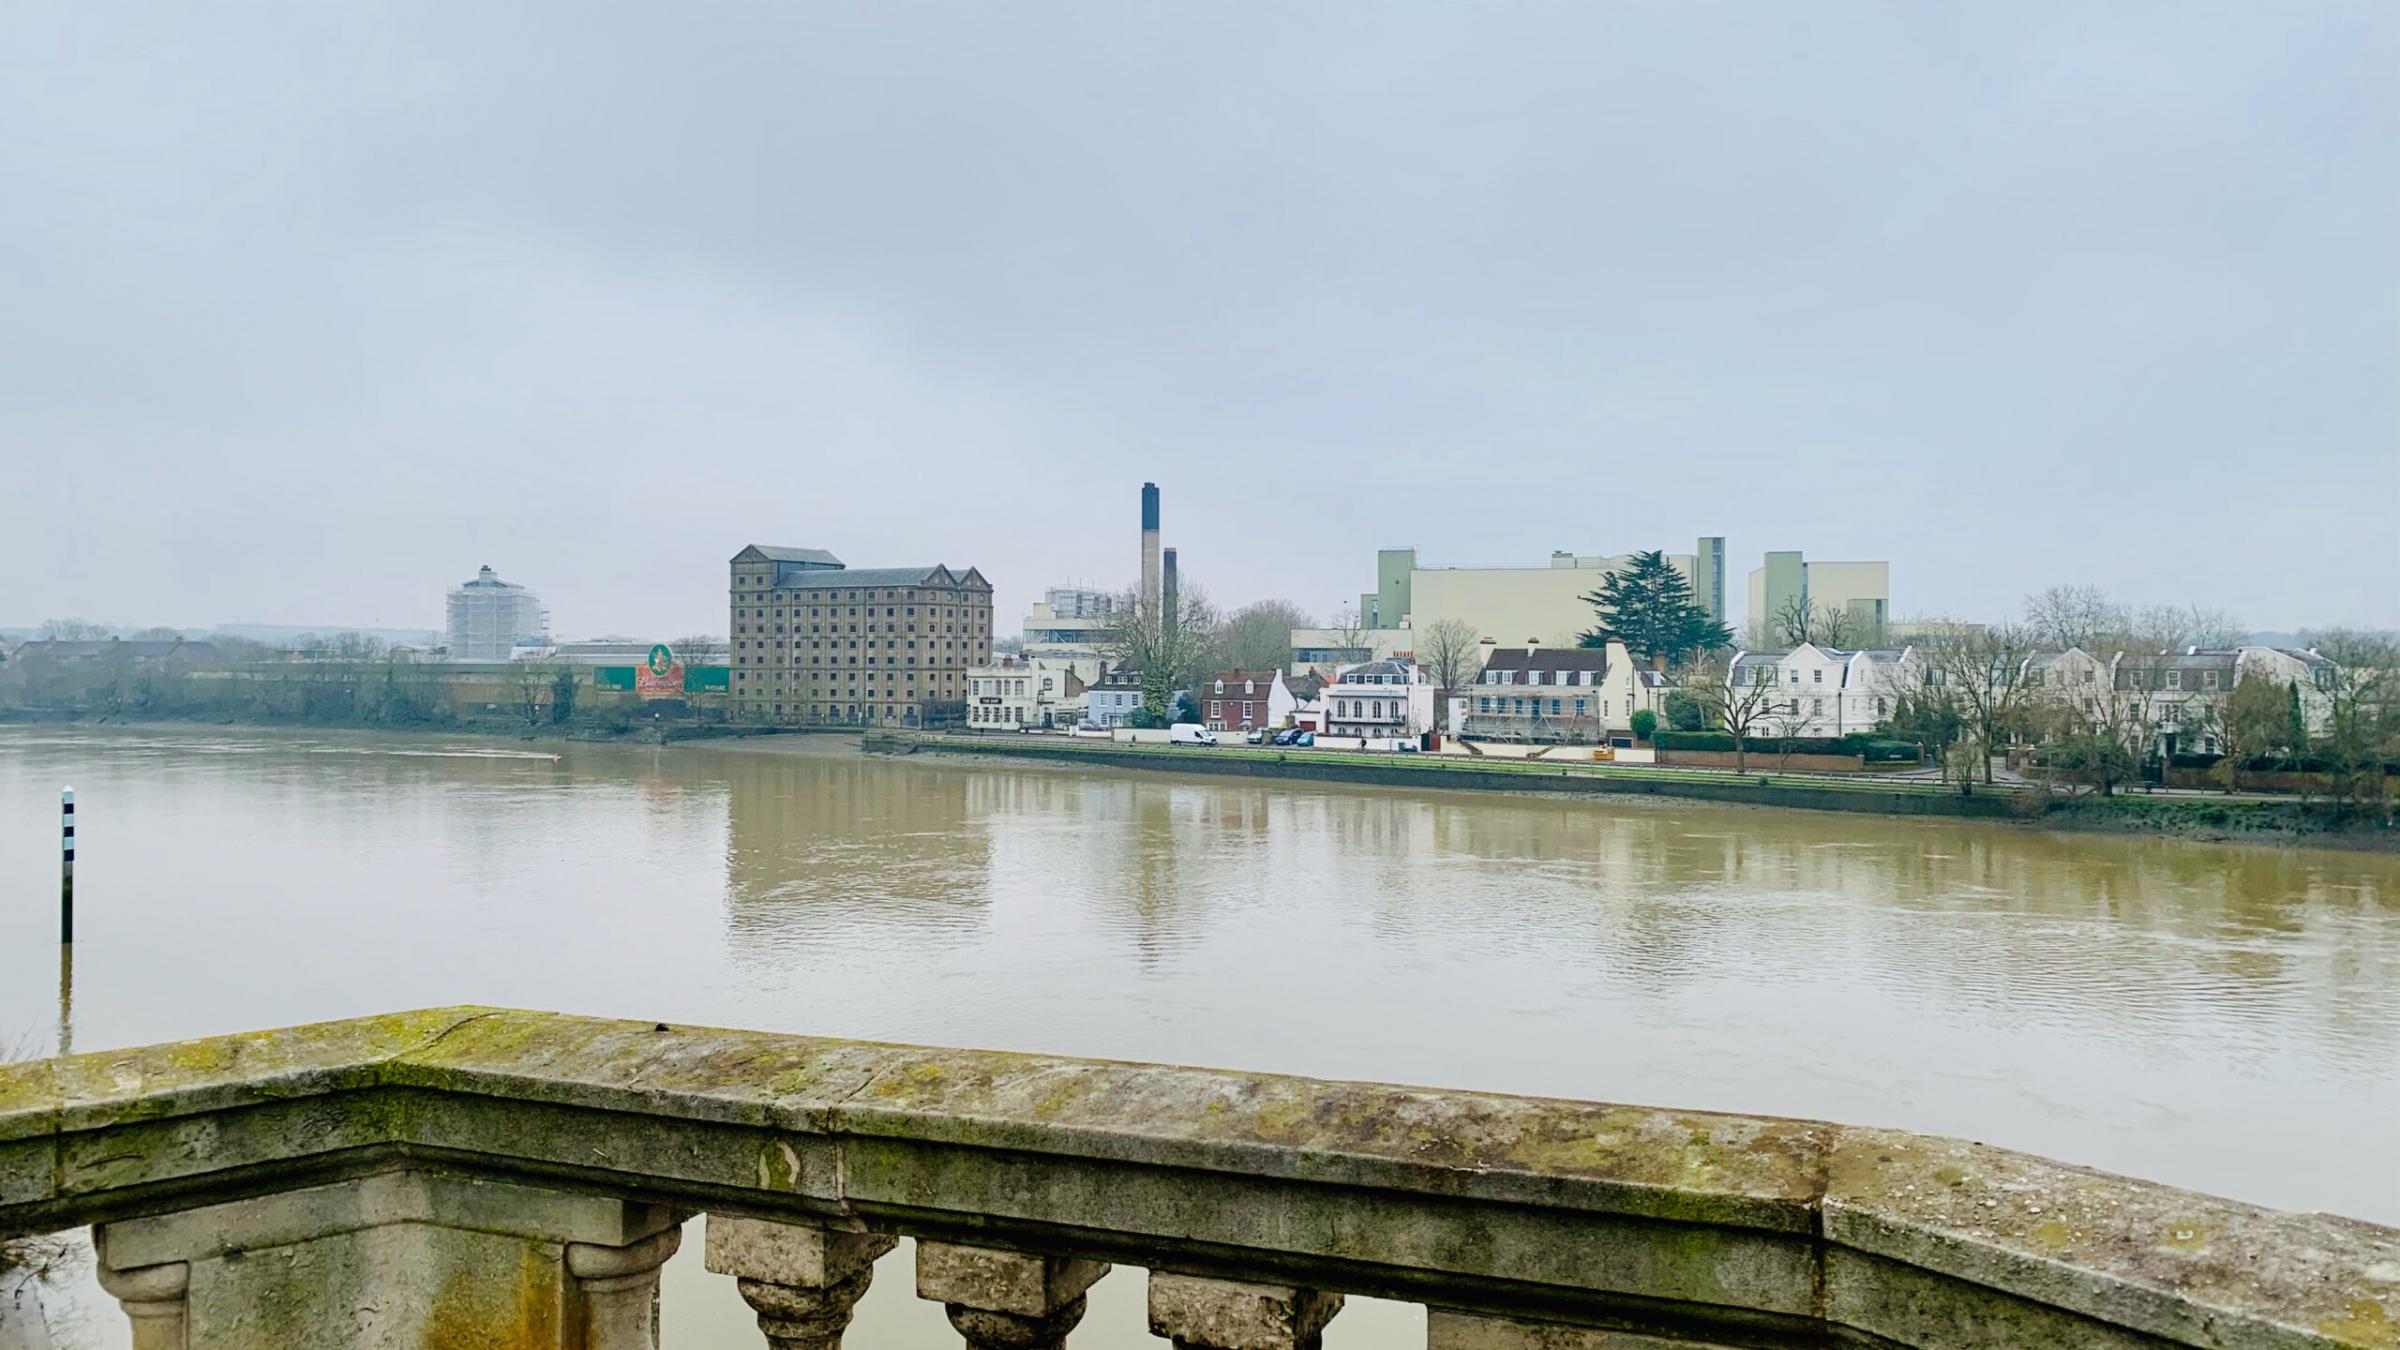 Photograph from Chiswick Bridge of current Stag Brewery site [Image: MBCG]